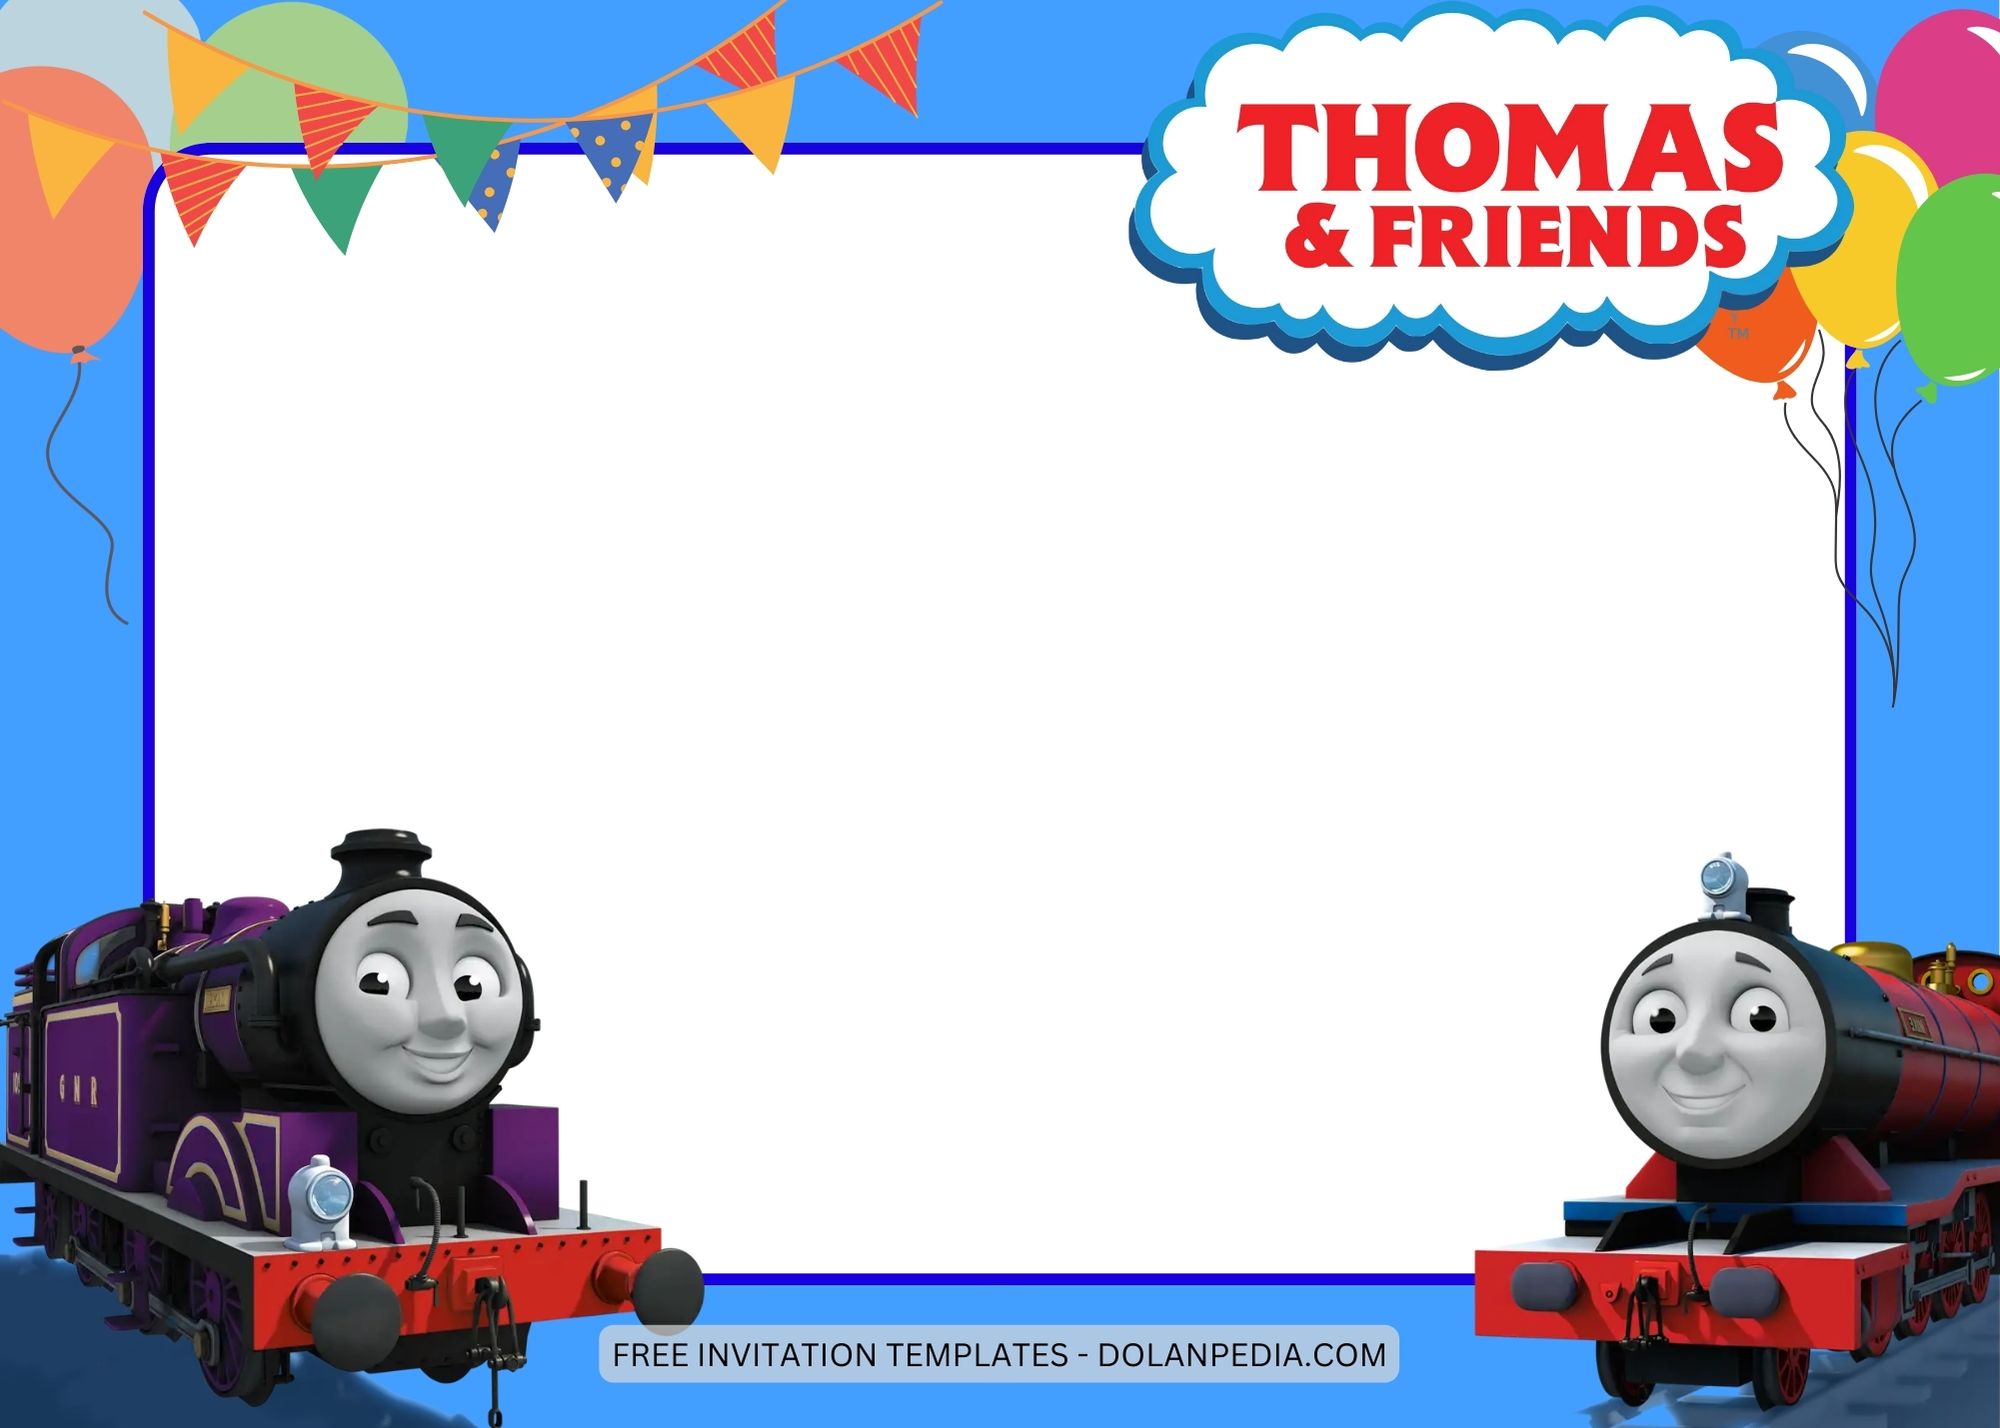 Blank Thomas and Friends Birthday Invitation Templates Two